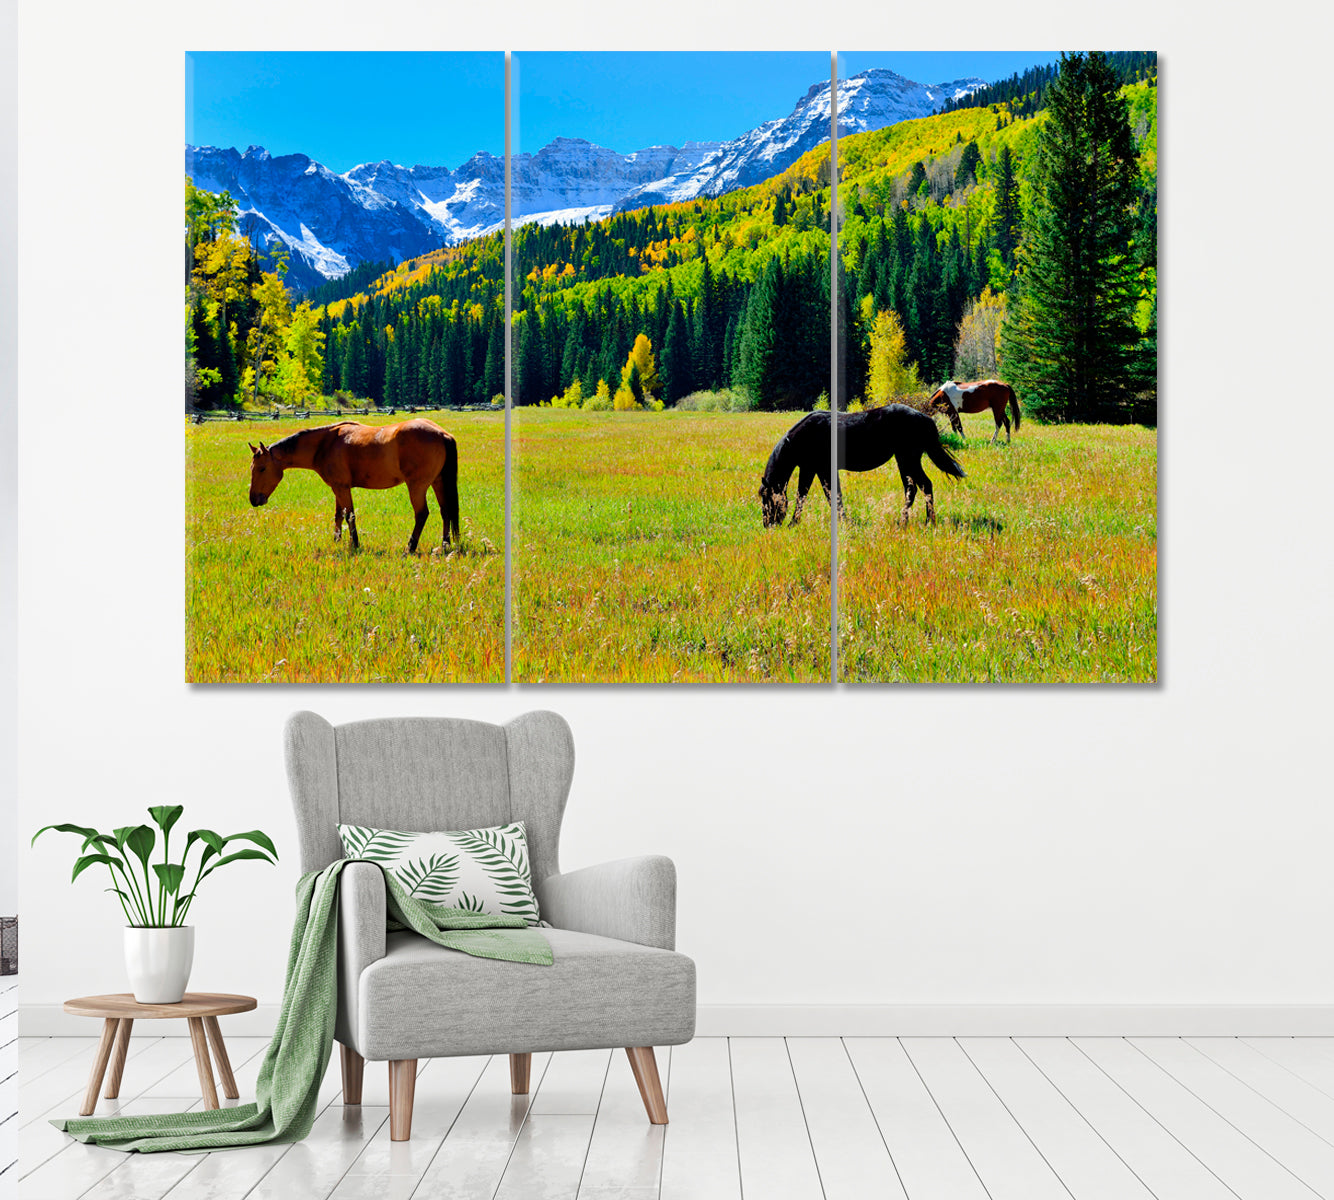 Horses in Rocky Mountains Canvas Print ArtLexy 3 Panels 36"x24" inches 